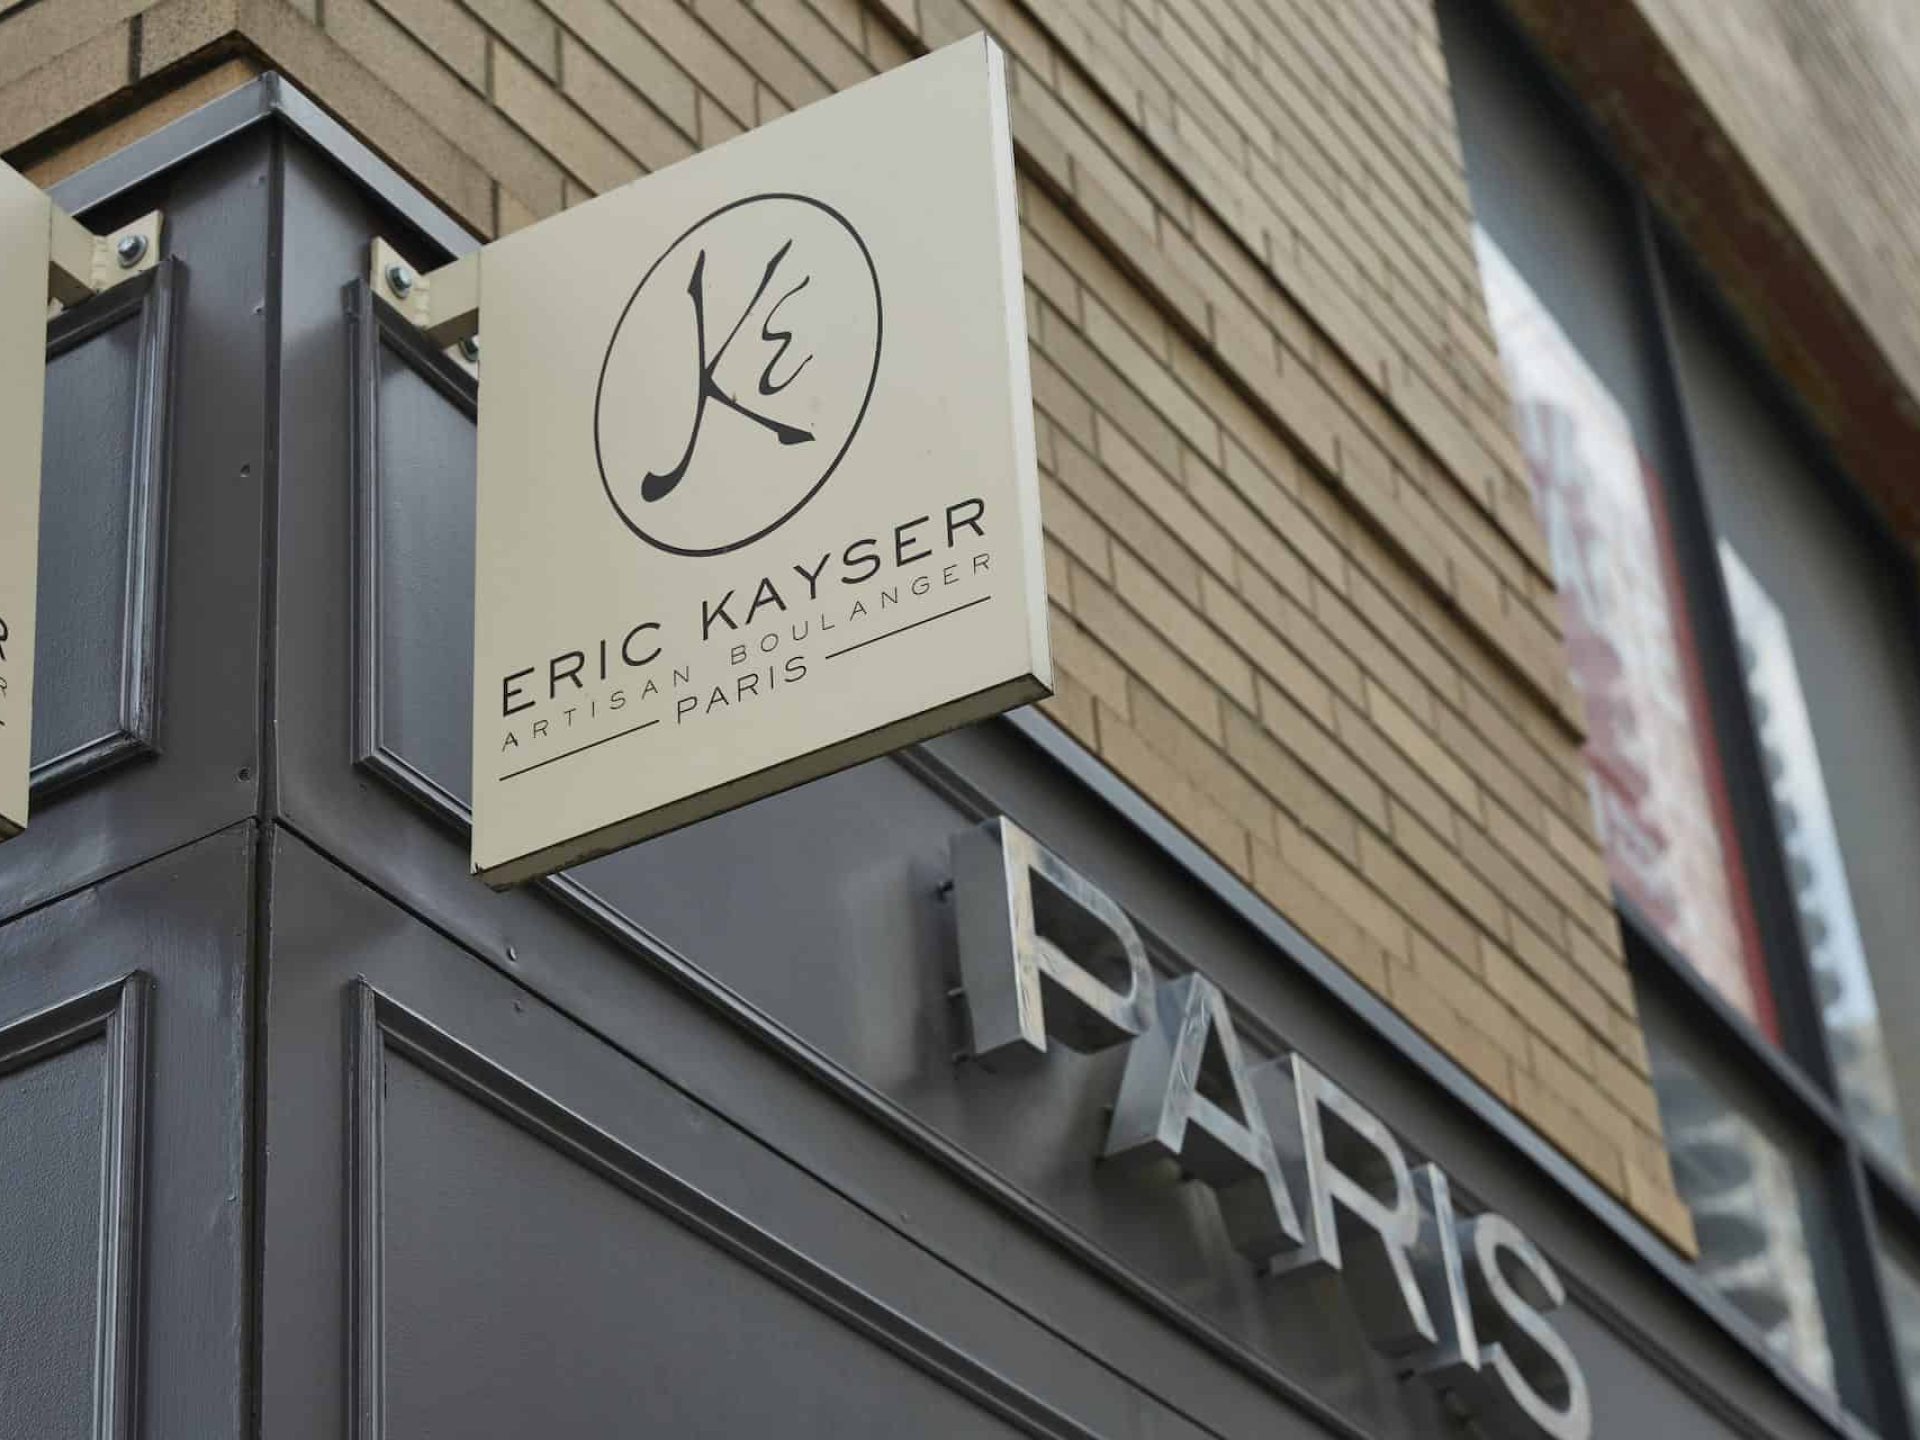 Close up of Eric Kayser Artisan Boulanger Paris business sign mounted on brick building with "Paris" sign in the background.